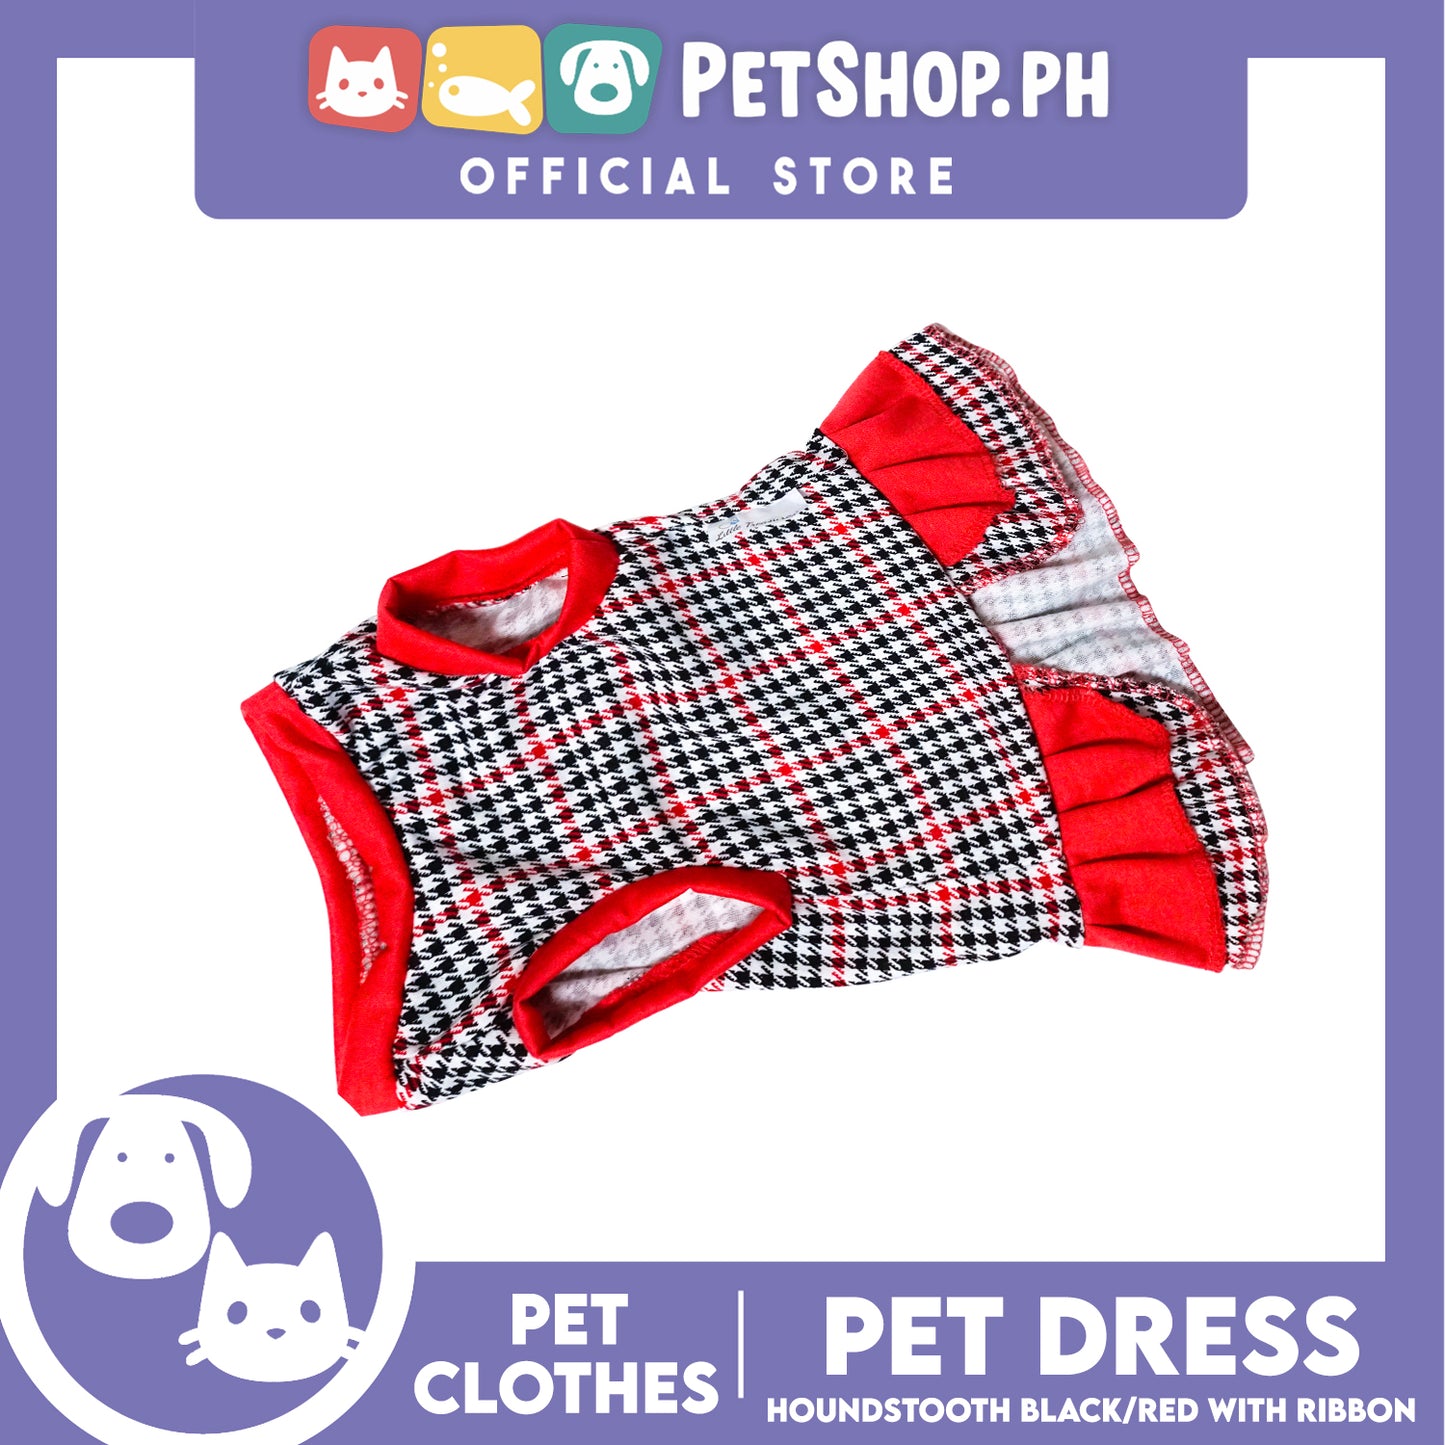 Pet Dress Houndstooth Black/Red with ribbon (Extra Large) Pet Dress Clothes Perfect for Dogs